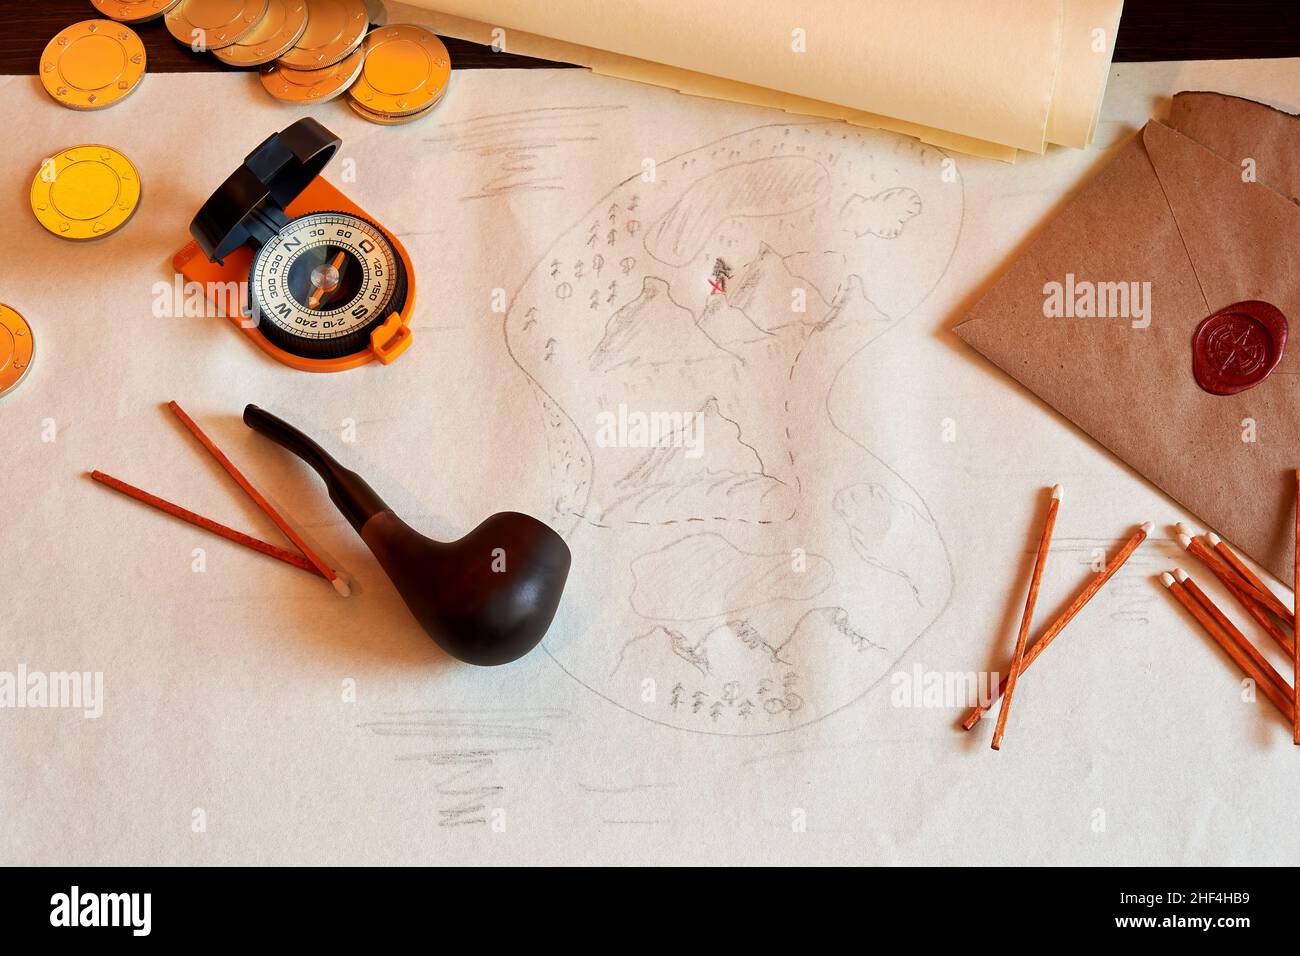 Table with an old treasure map, smoking accessories, compass, and coins. Games and adventures and exploring backgrounds Stock Photo